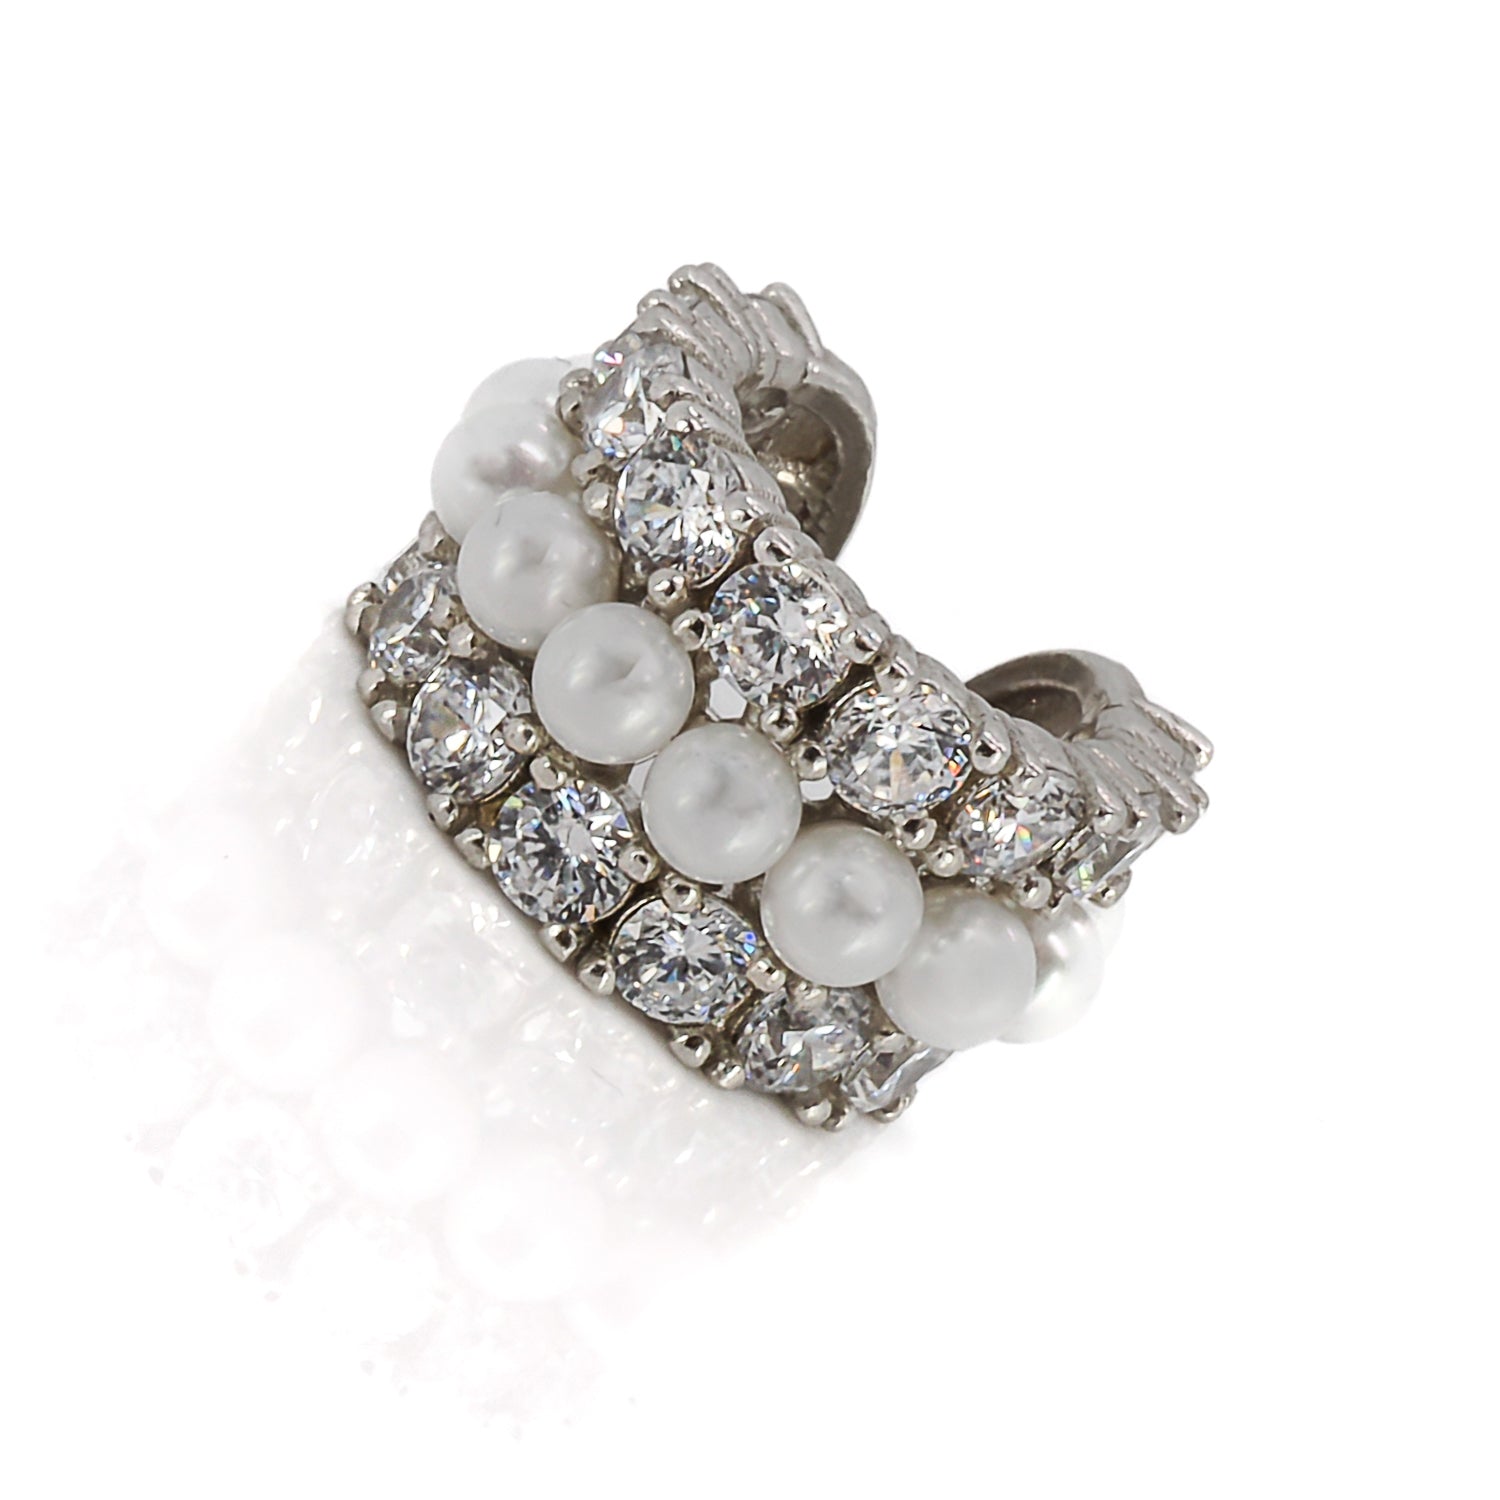 Elegance Meets Versatility - Diamond & Pearl Silver Cuff Earring Handcrafted in the USA.